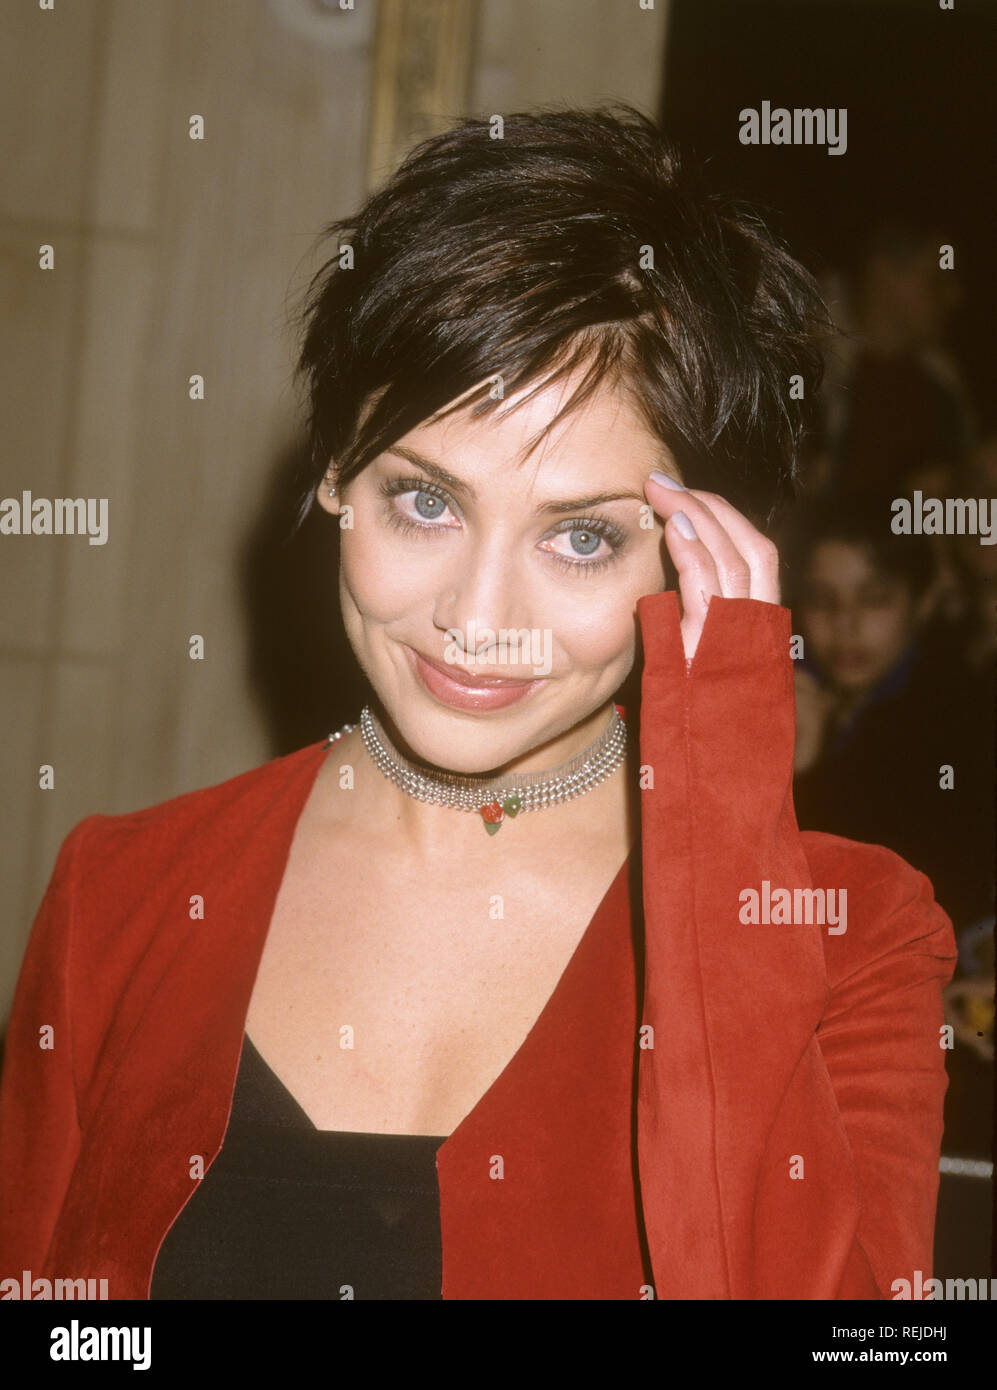 Natalie Imbruglia High Resolution Stock Photography And Images Alamy